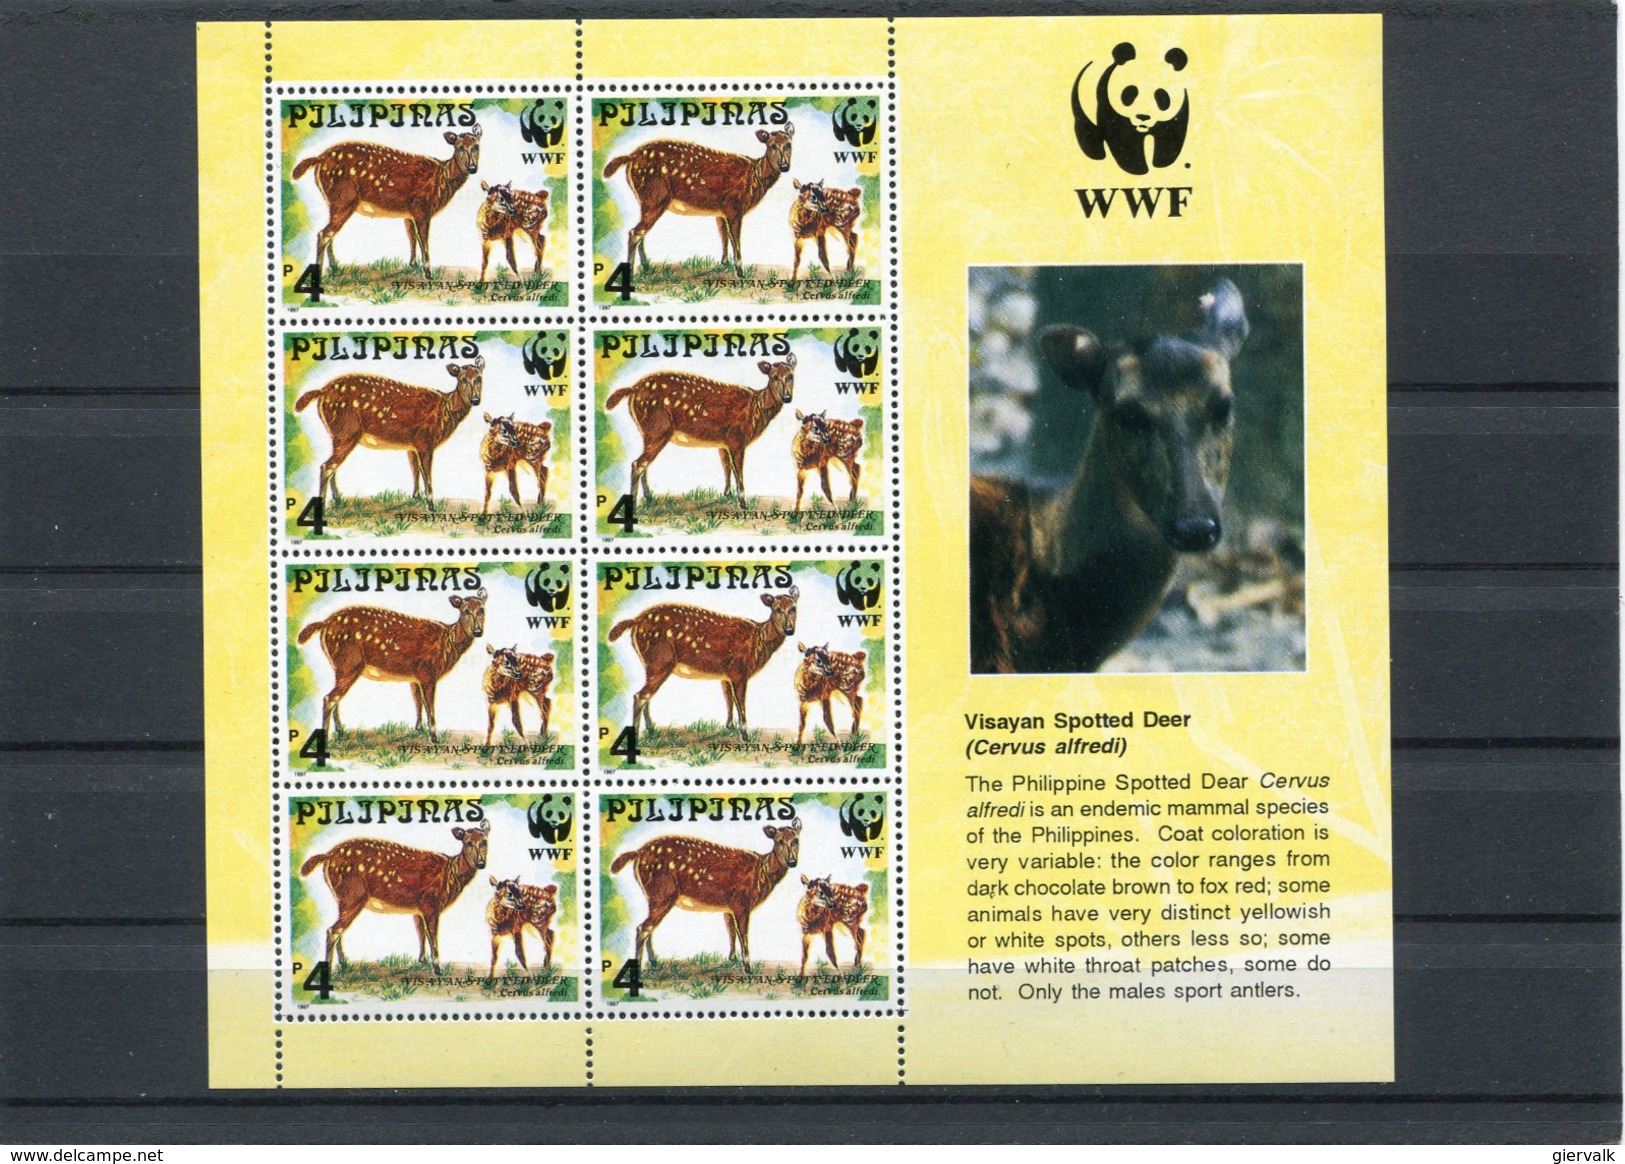 PHILLIPINES 1997 WWF  SHEET(4) With MAMMELS. MNH. - Unused Stamps